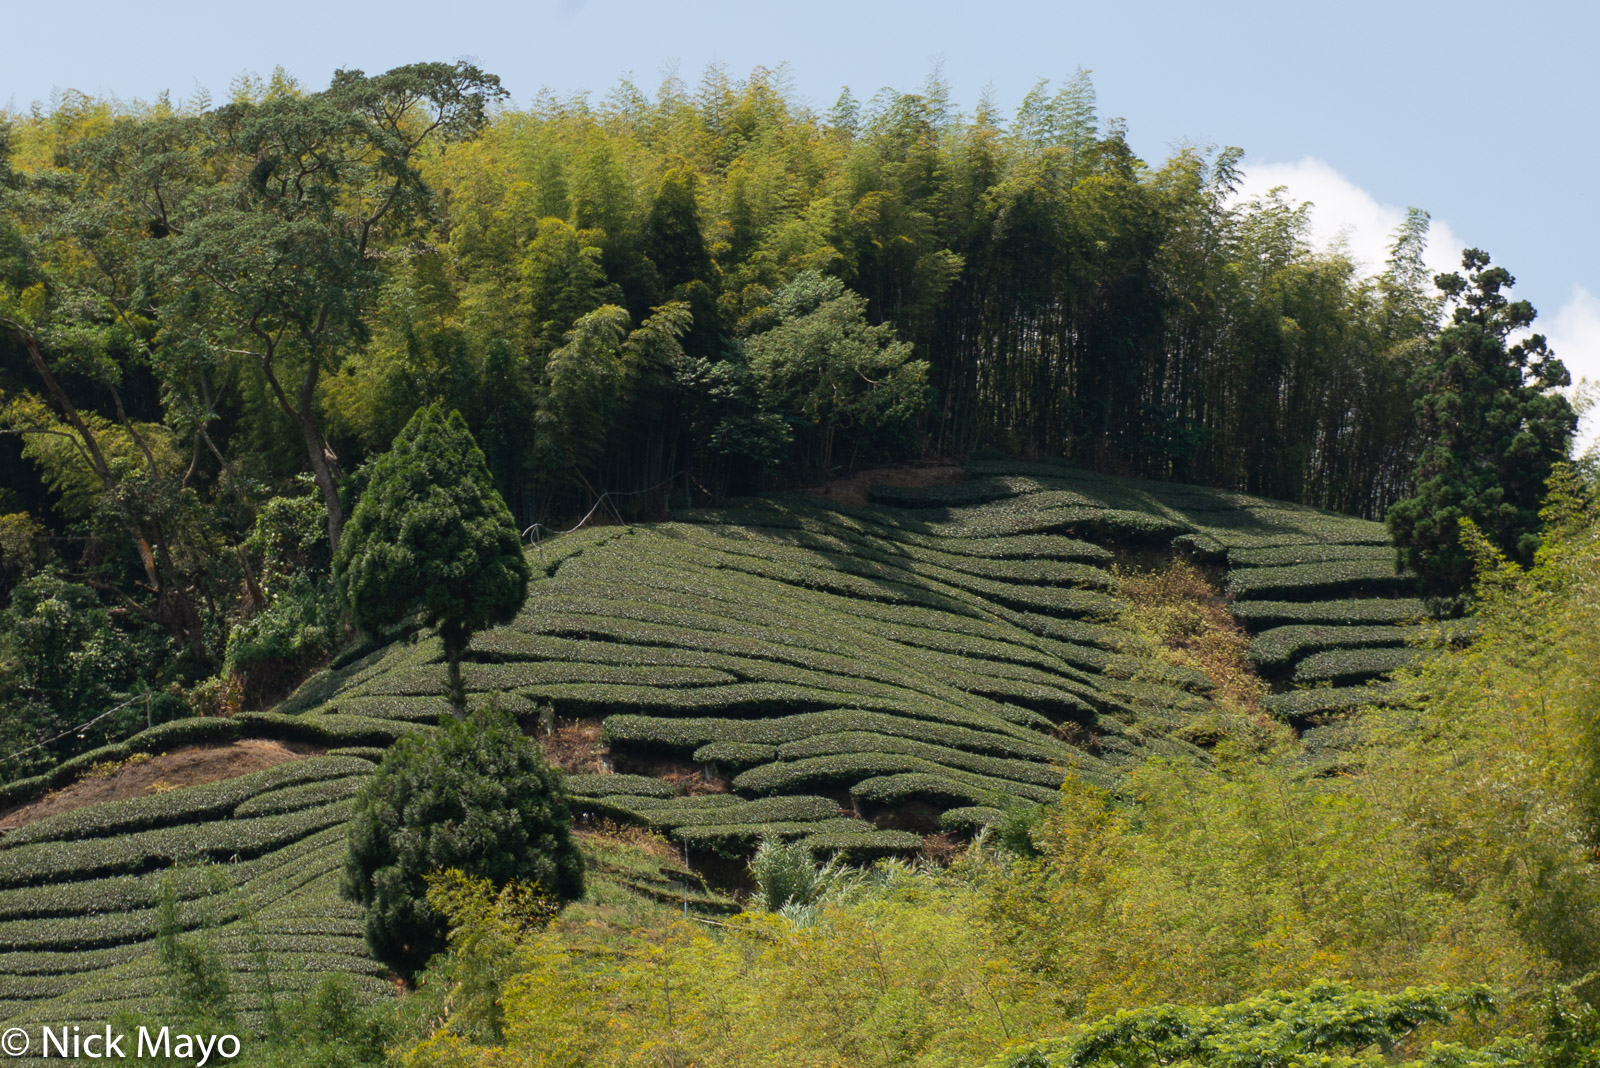 A tea field at Rueili between groves of bamboo.